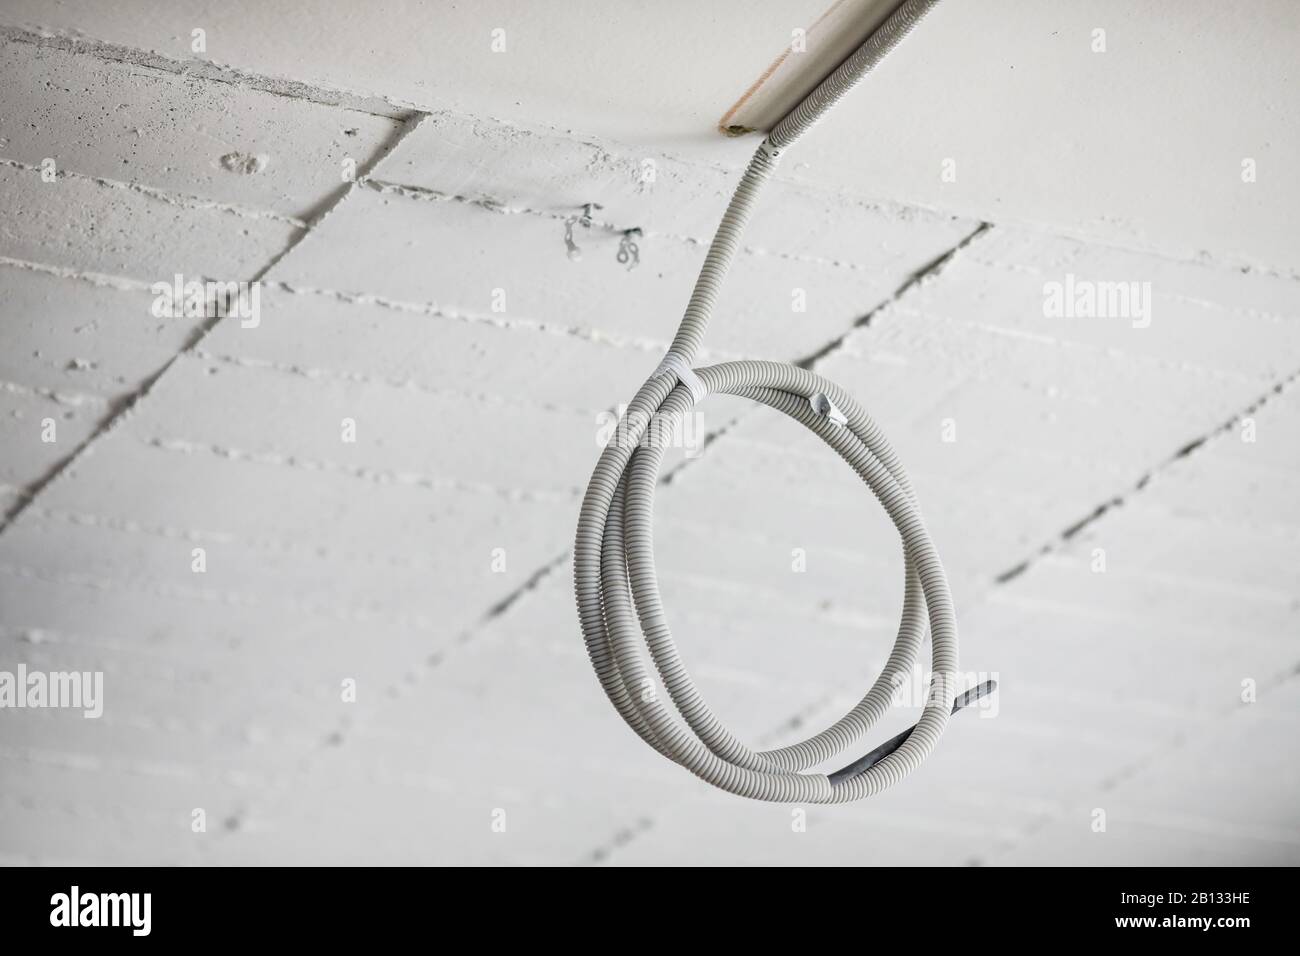 Electricity cables in an unfinished building on a construction site. Stock Photo